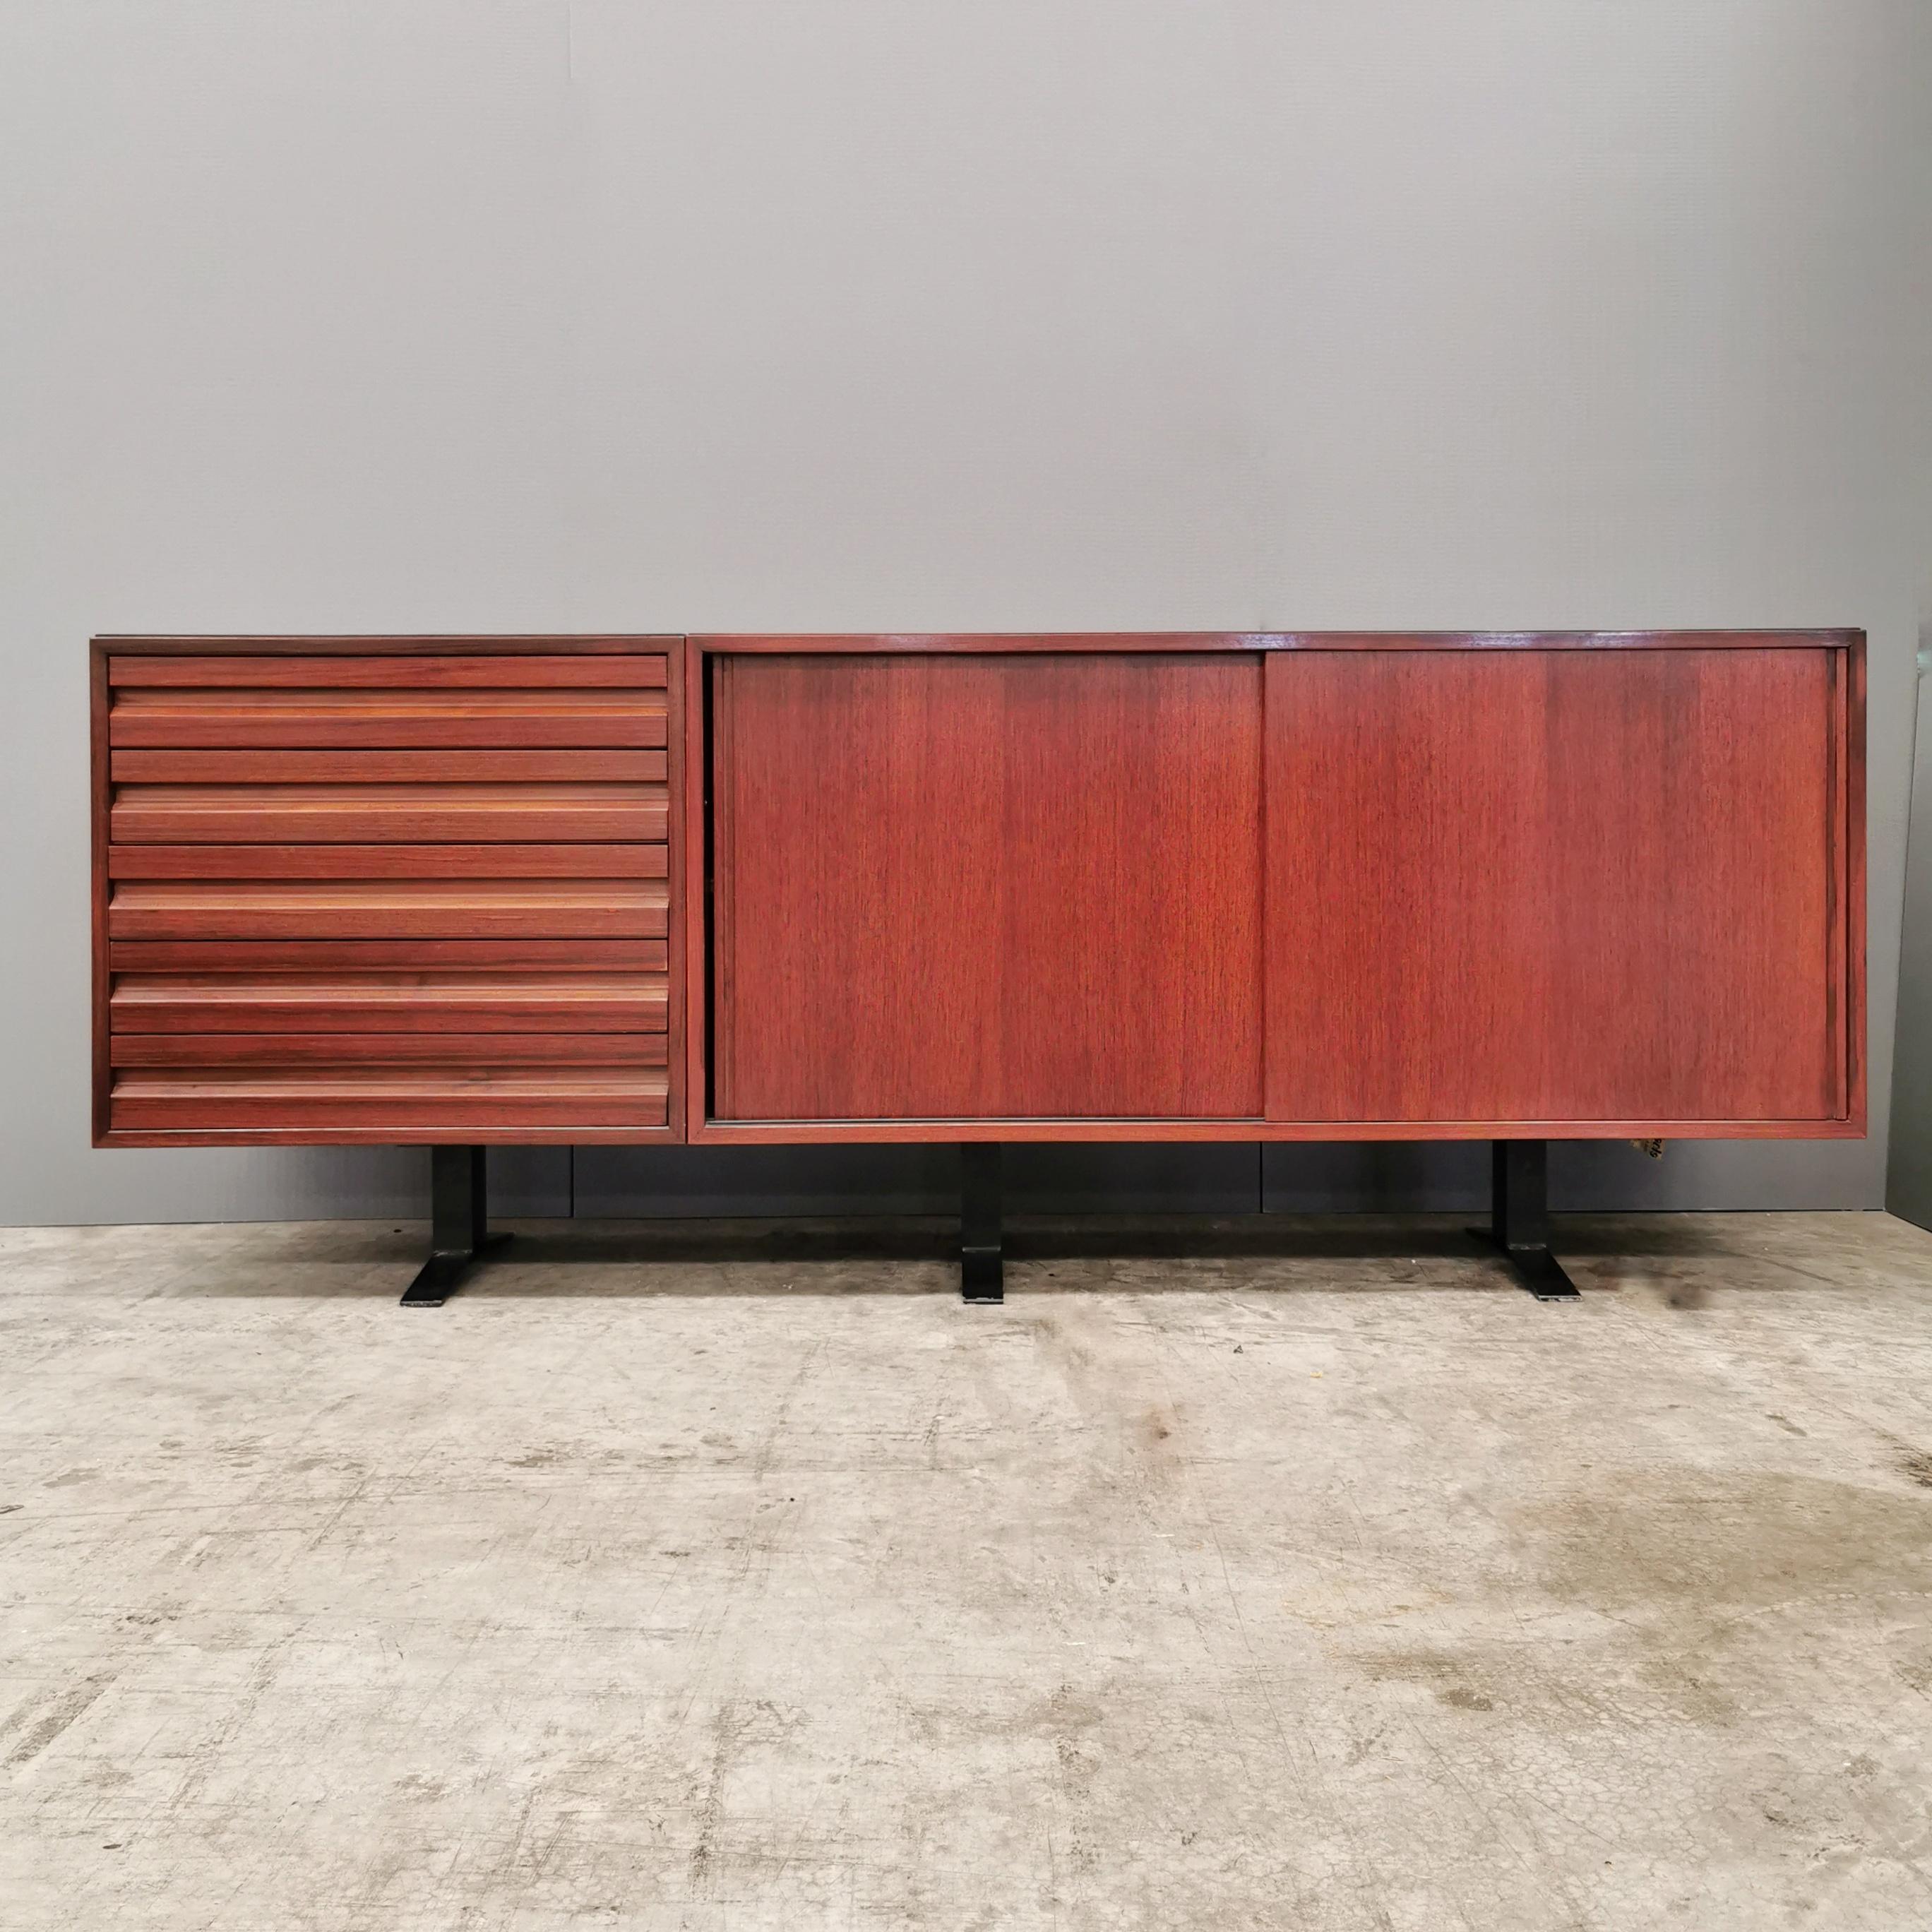 Sideboard Sideboard in Rosewood with Drawers and Double Sliding. Tecno production 1960s based on a design by Osvaldo Borsani. the cabinet is in excellent condition.